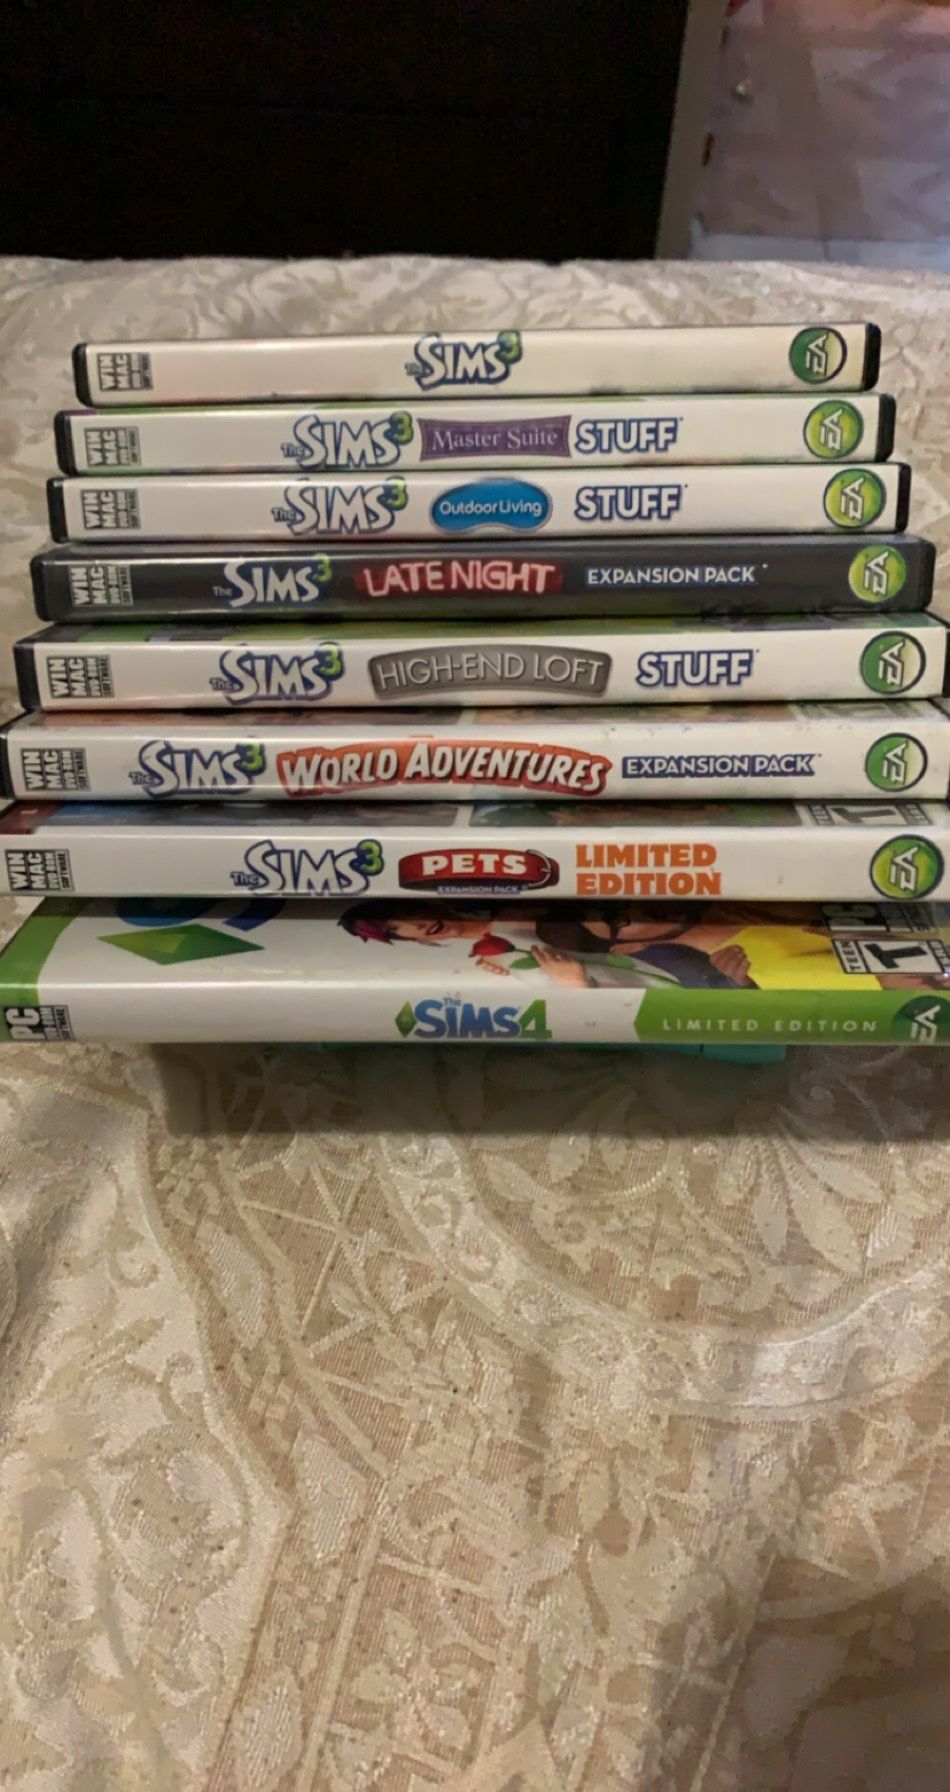 PC sims 3 and 4 and plus expansion pack